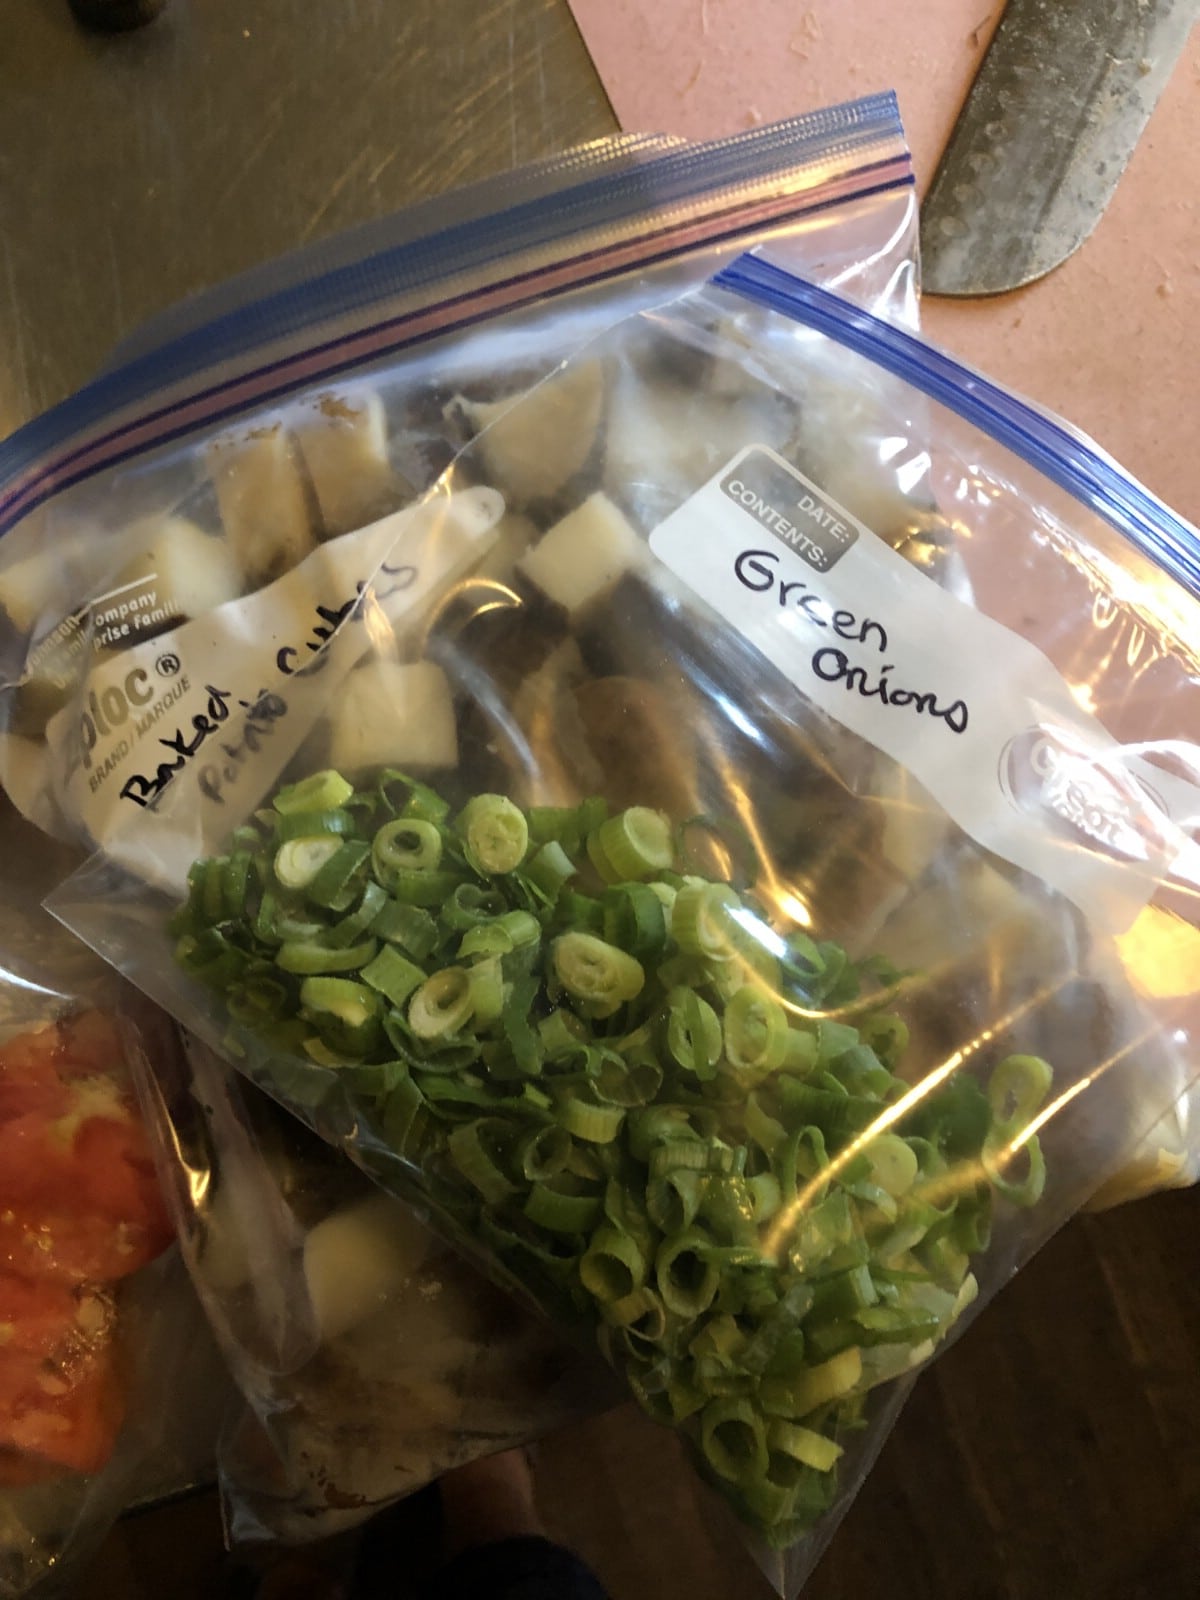 green onions and potatoes bagged in zipper bags for freezing